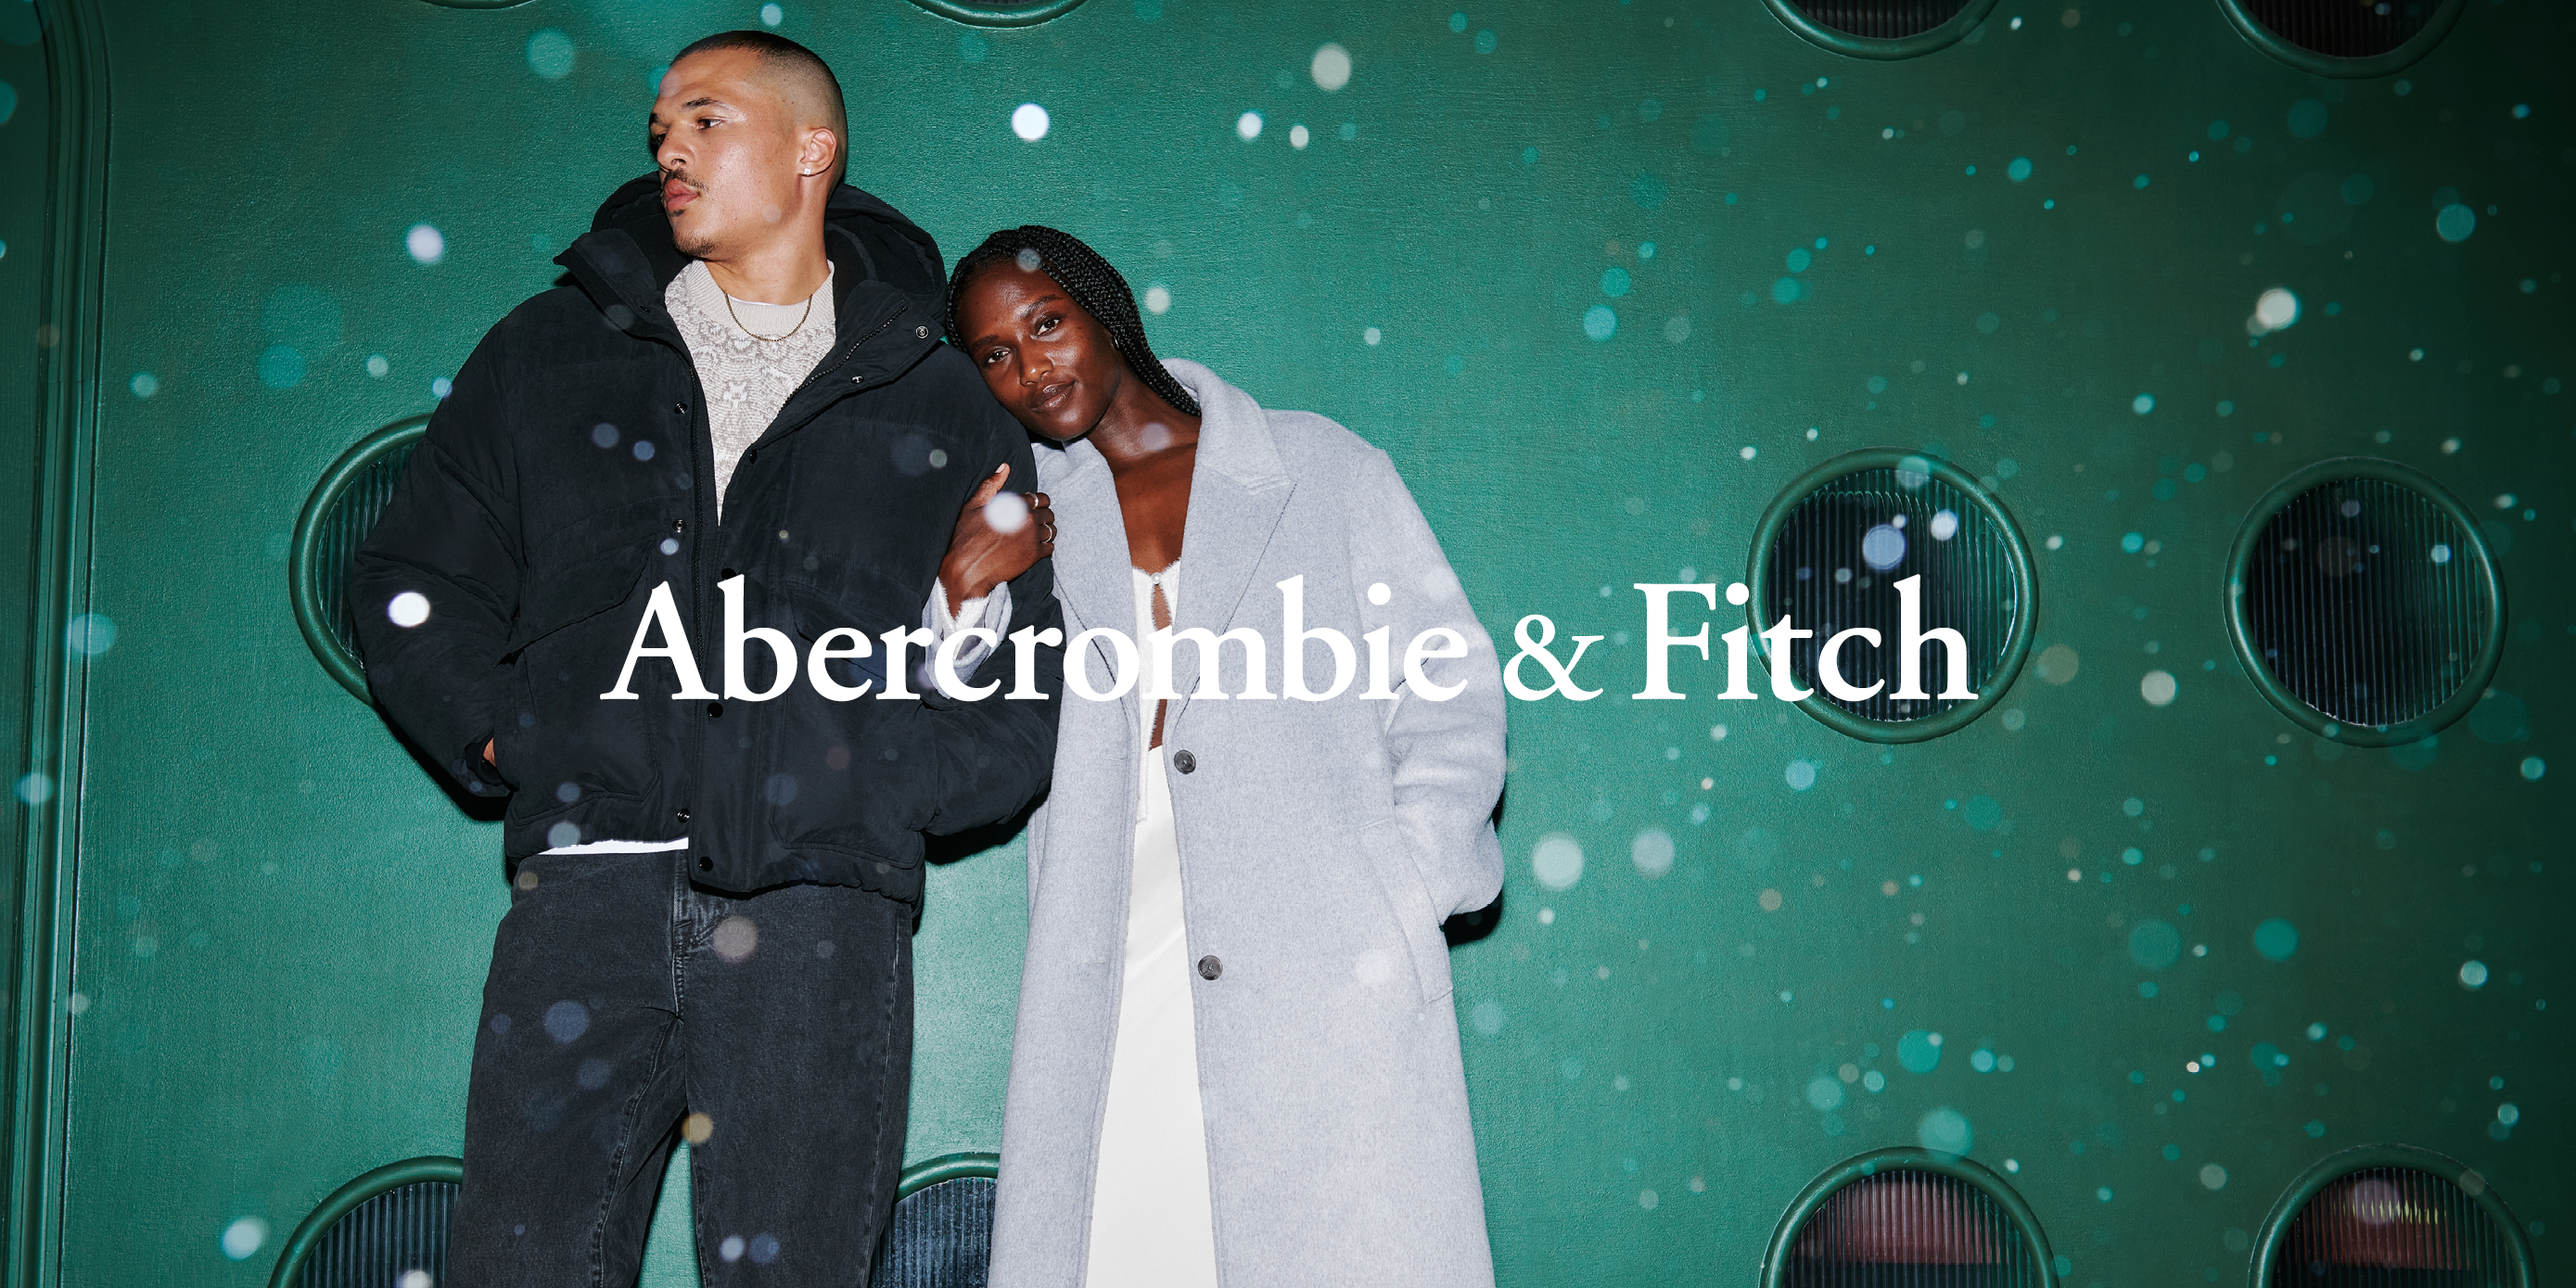 Abercrombie & Fitch - Abercrombie